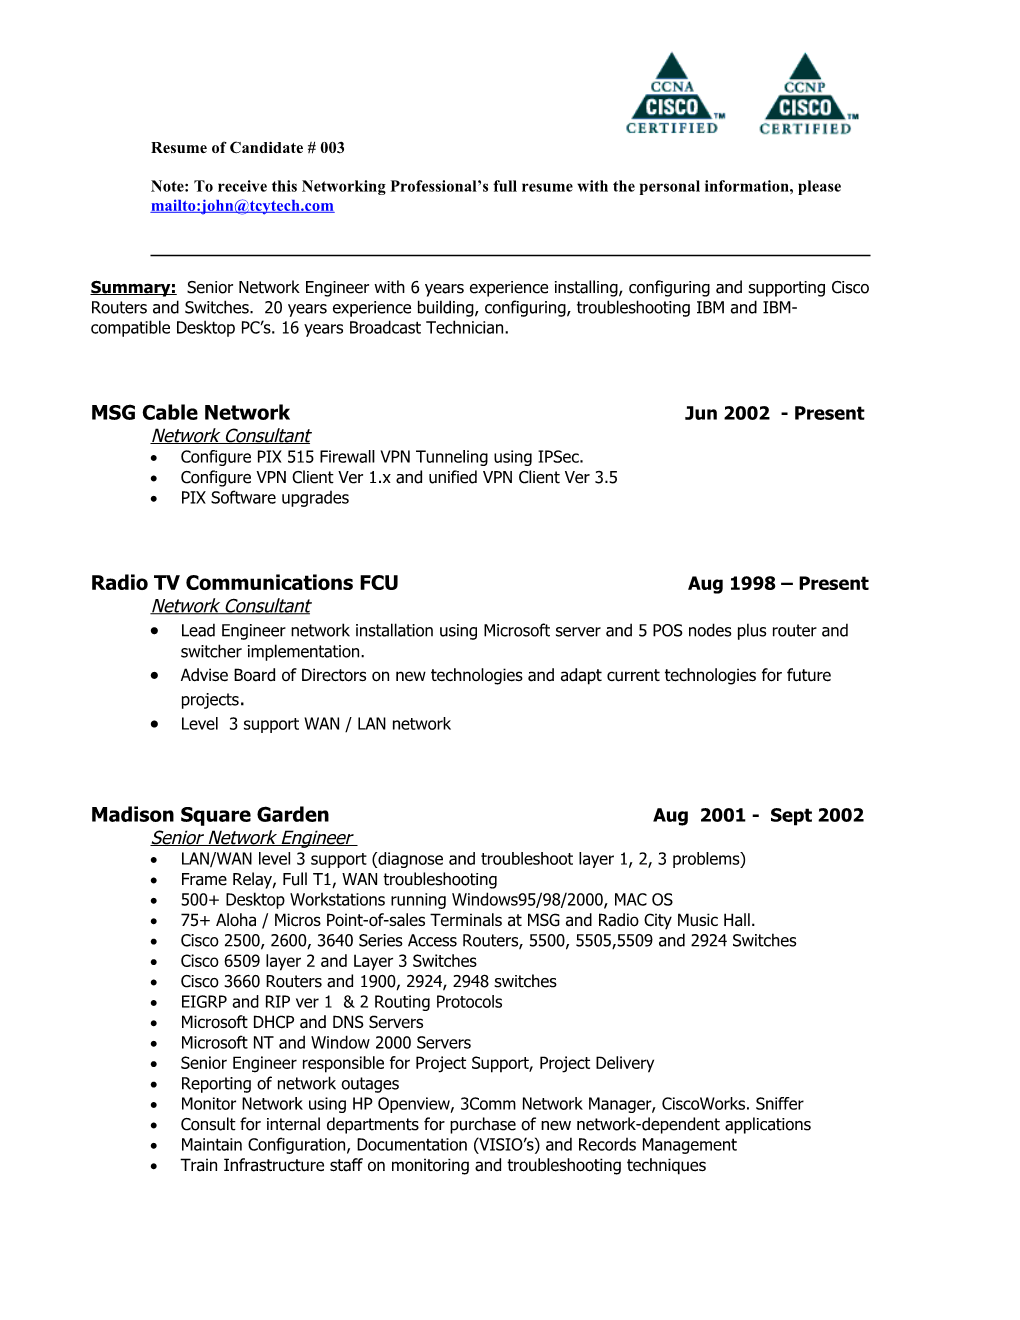 Resume of Candidate # 003